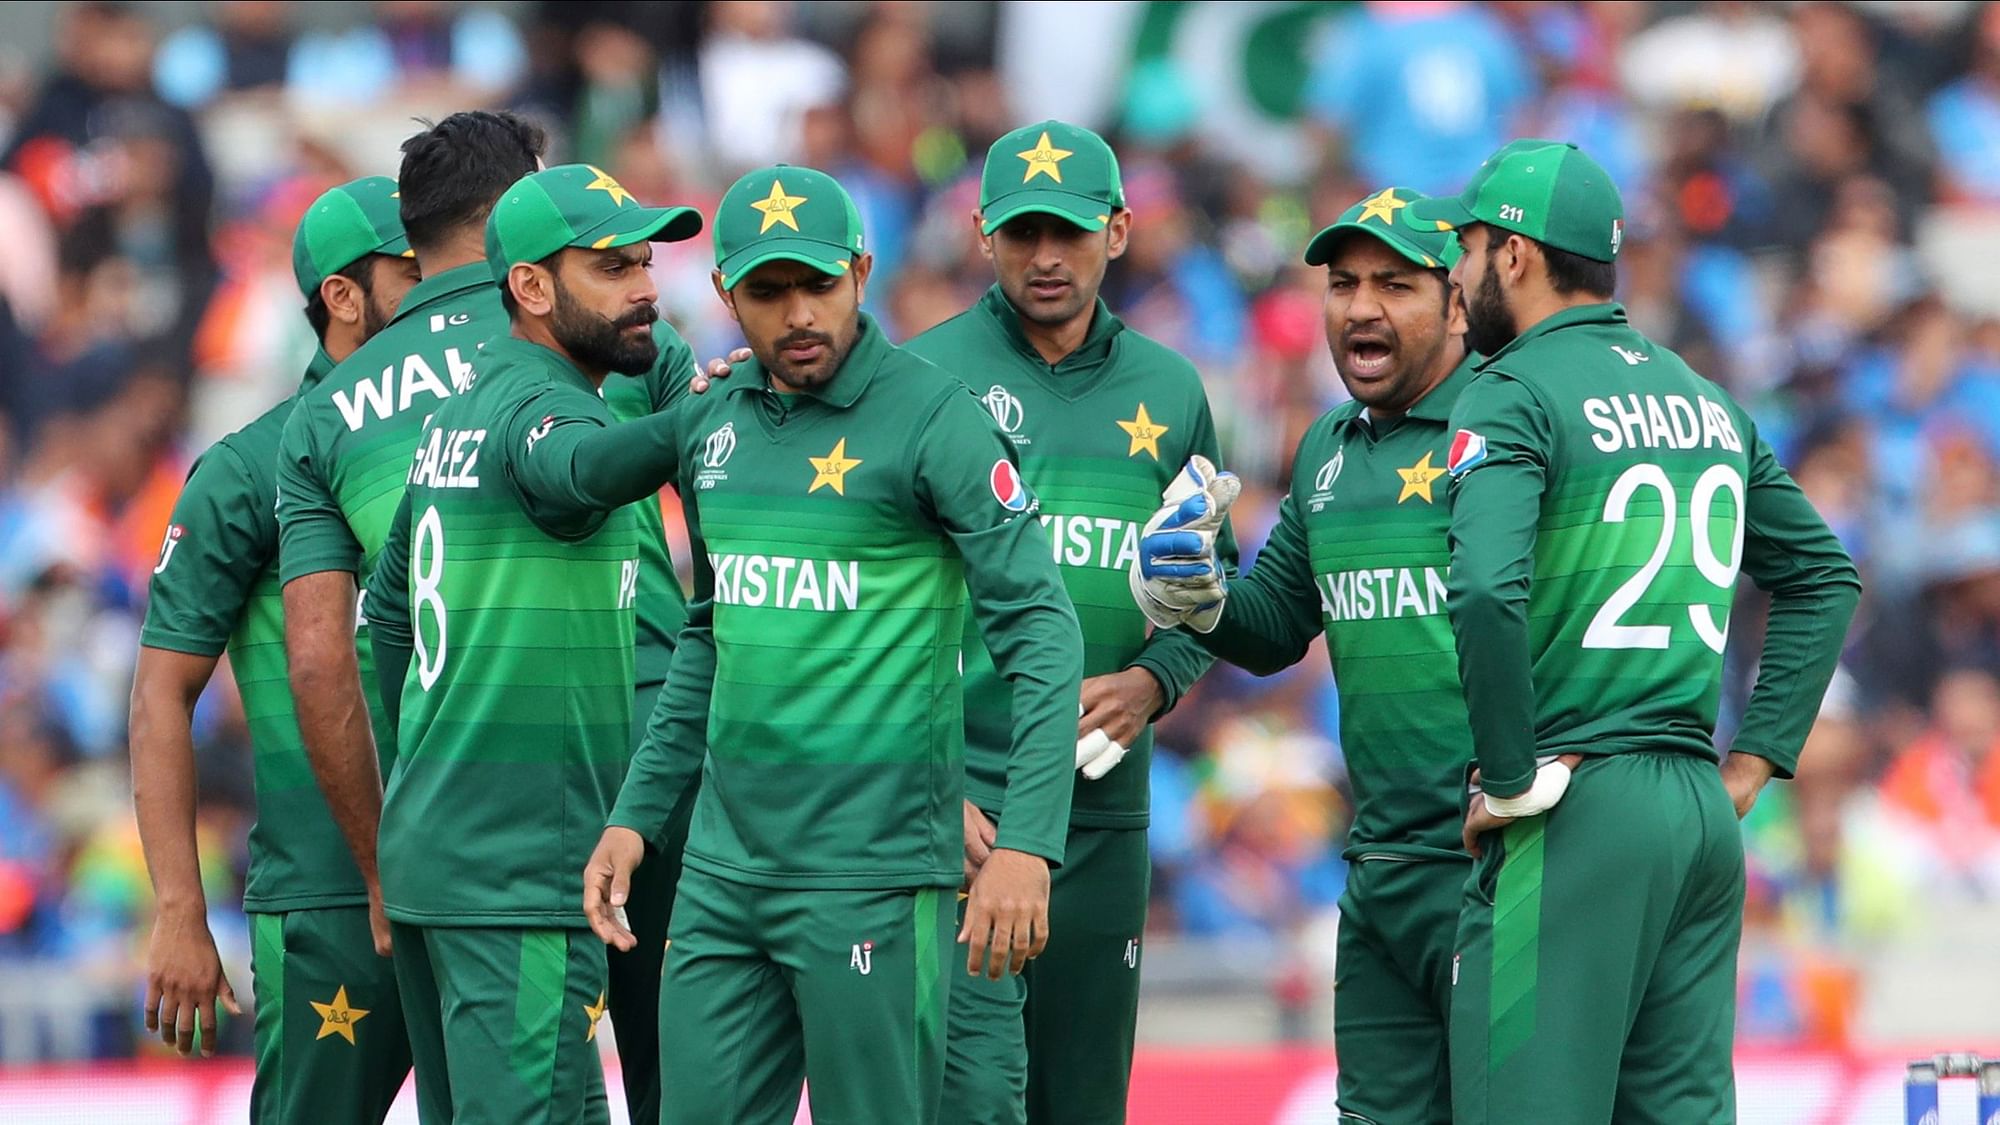 Pakistan media is blaming a feud in their cricket for the reason of their loss to India.